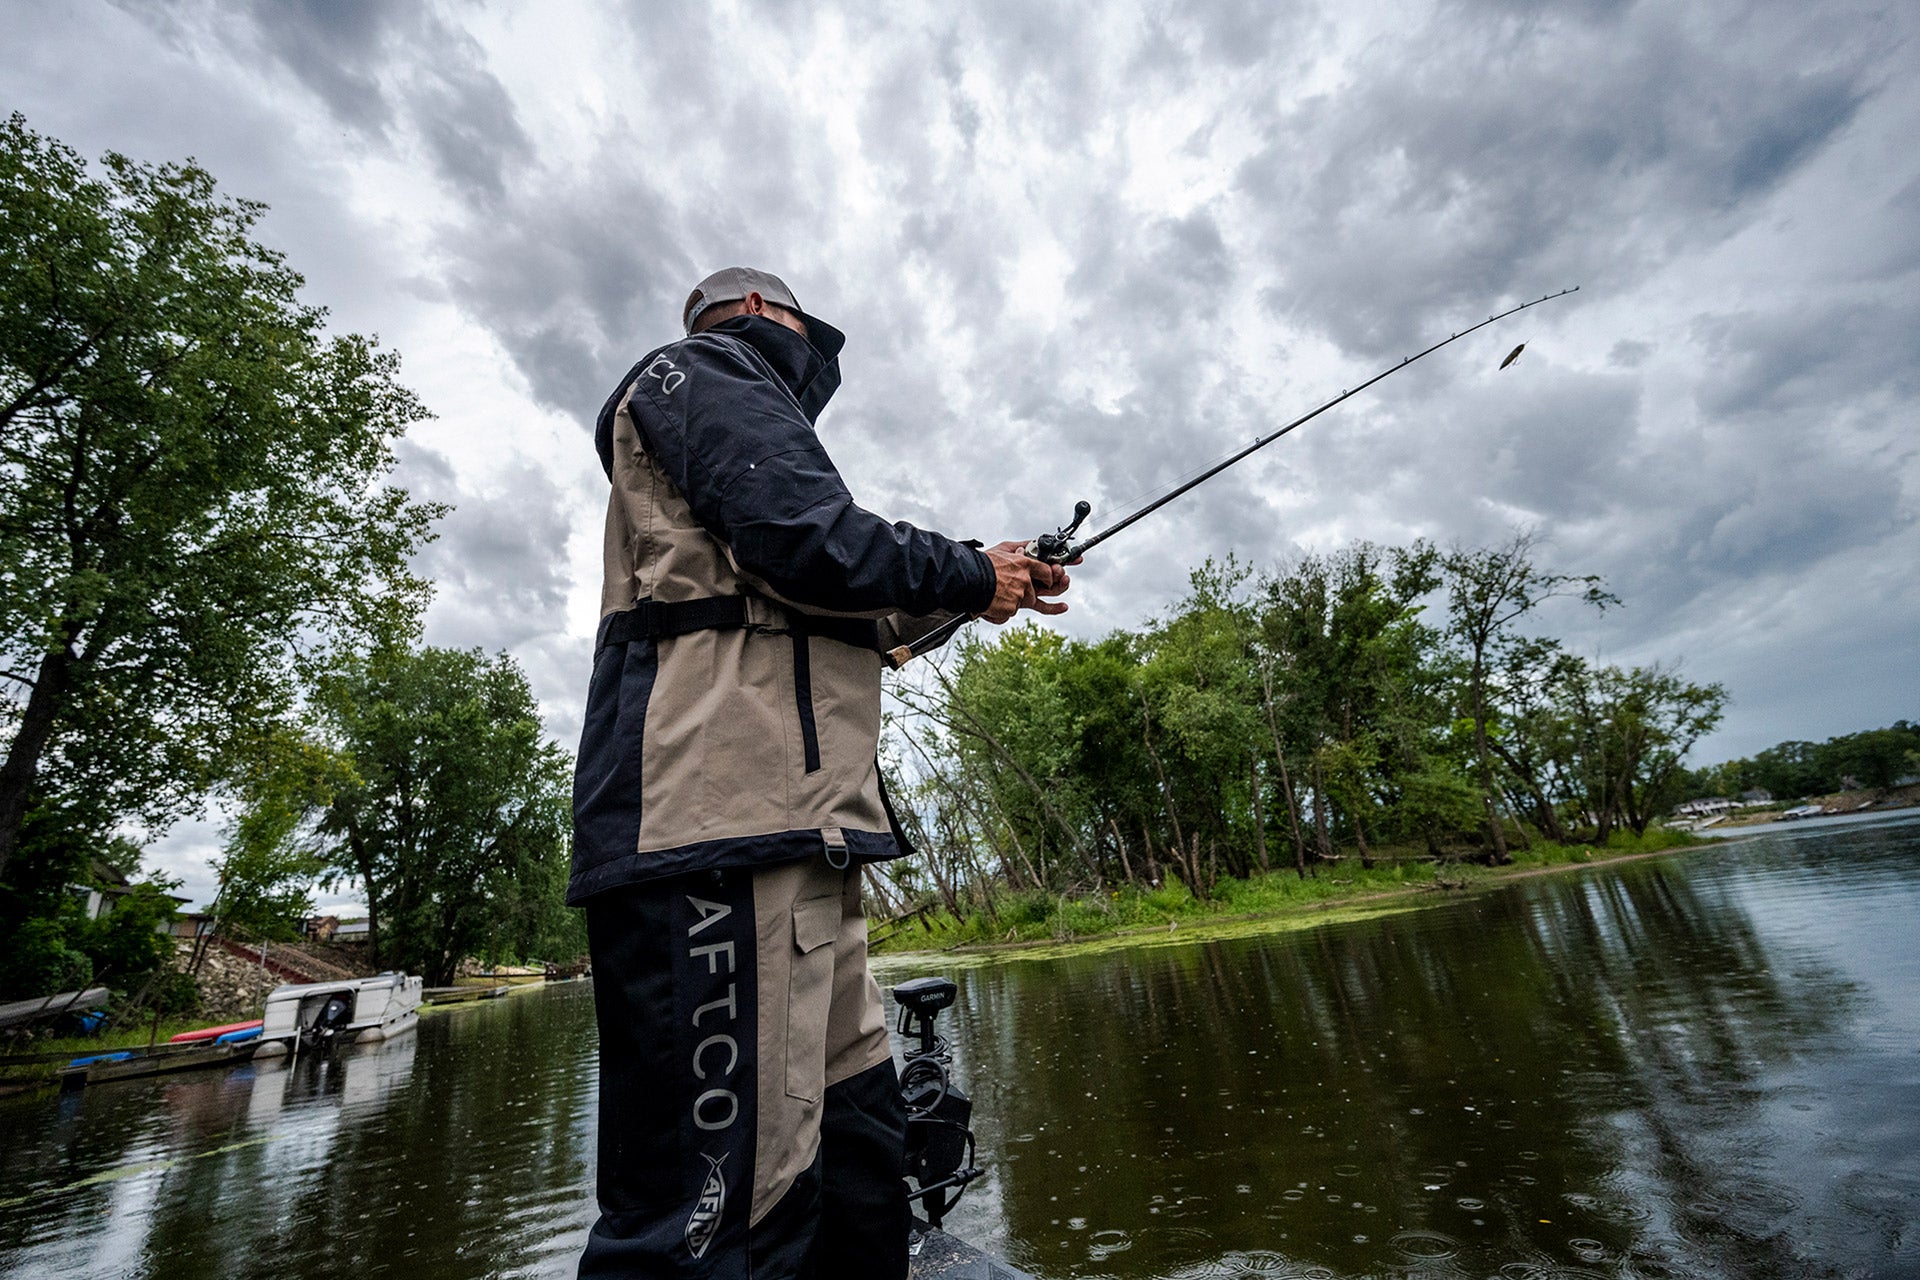 AFTCO Tips on Gearing Up for Winter Fishing - The Fishing Wire